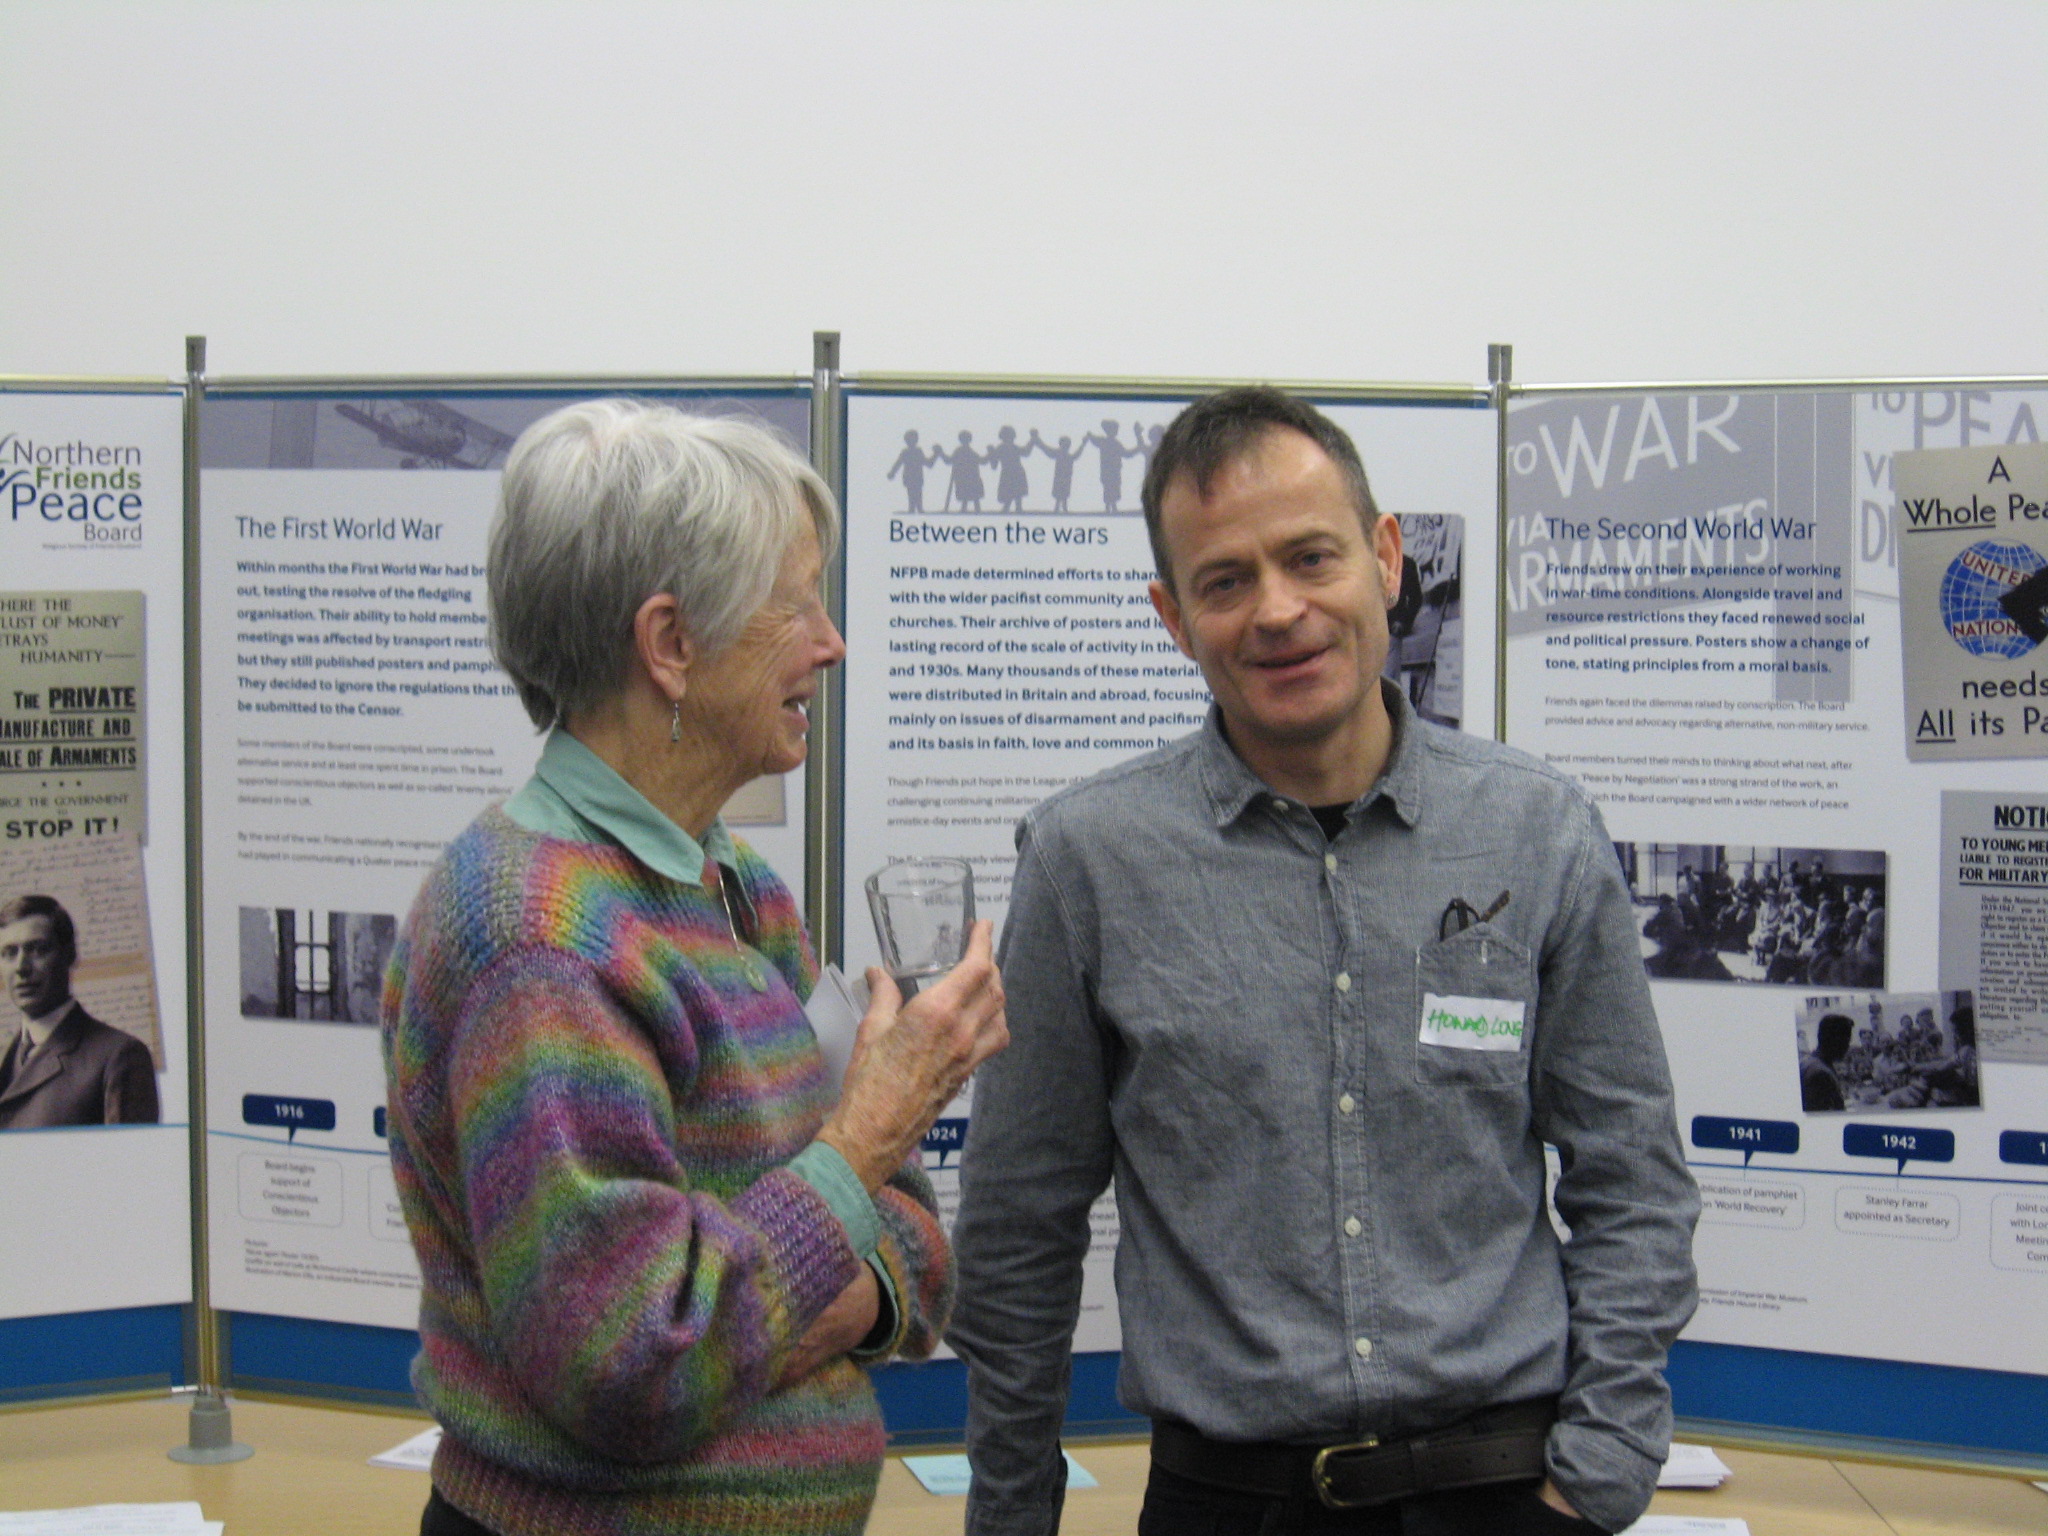 Two people chatting in front of display boards to celebrate 100 years of NFPB.